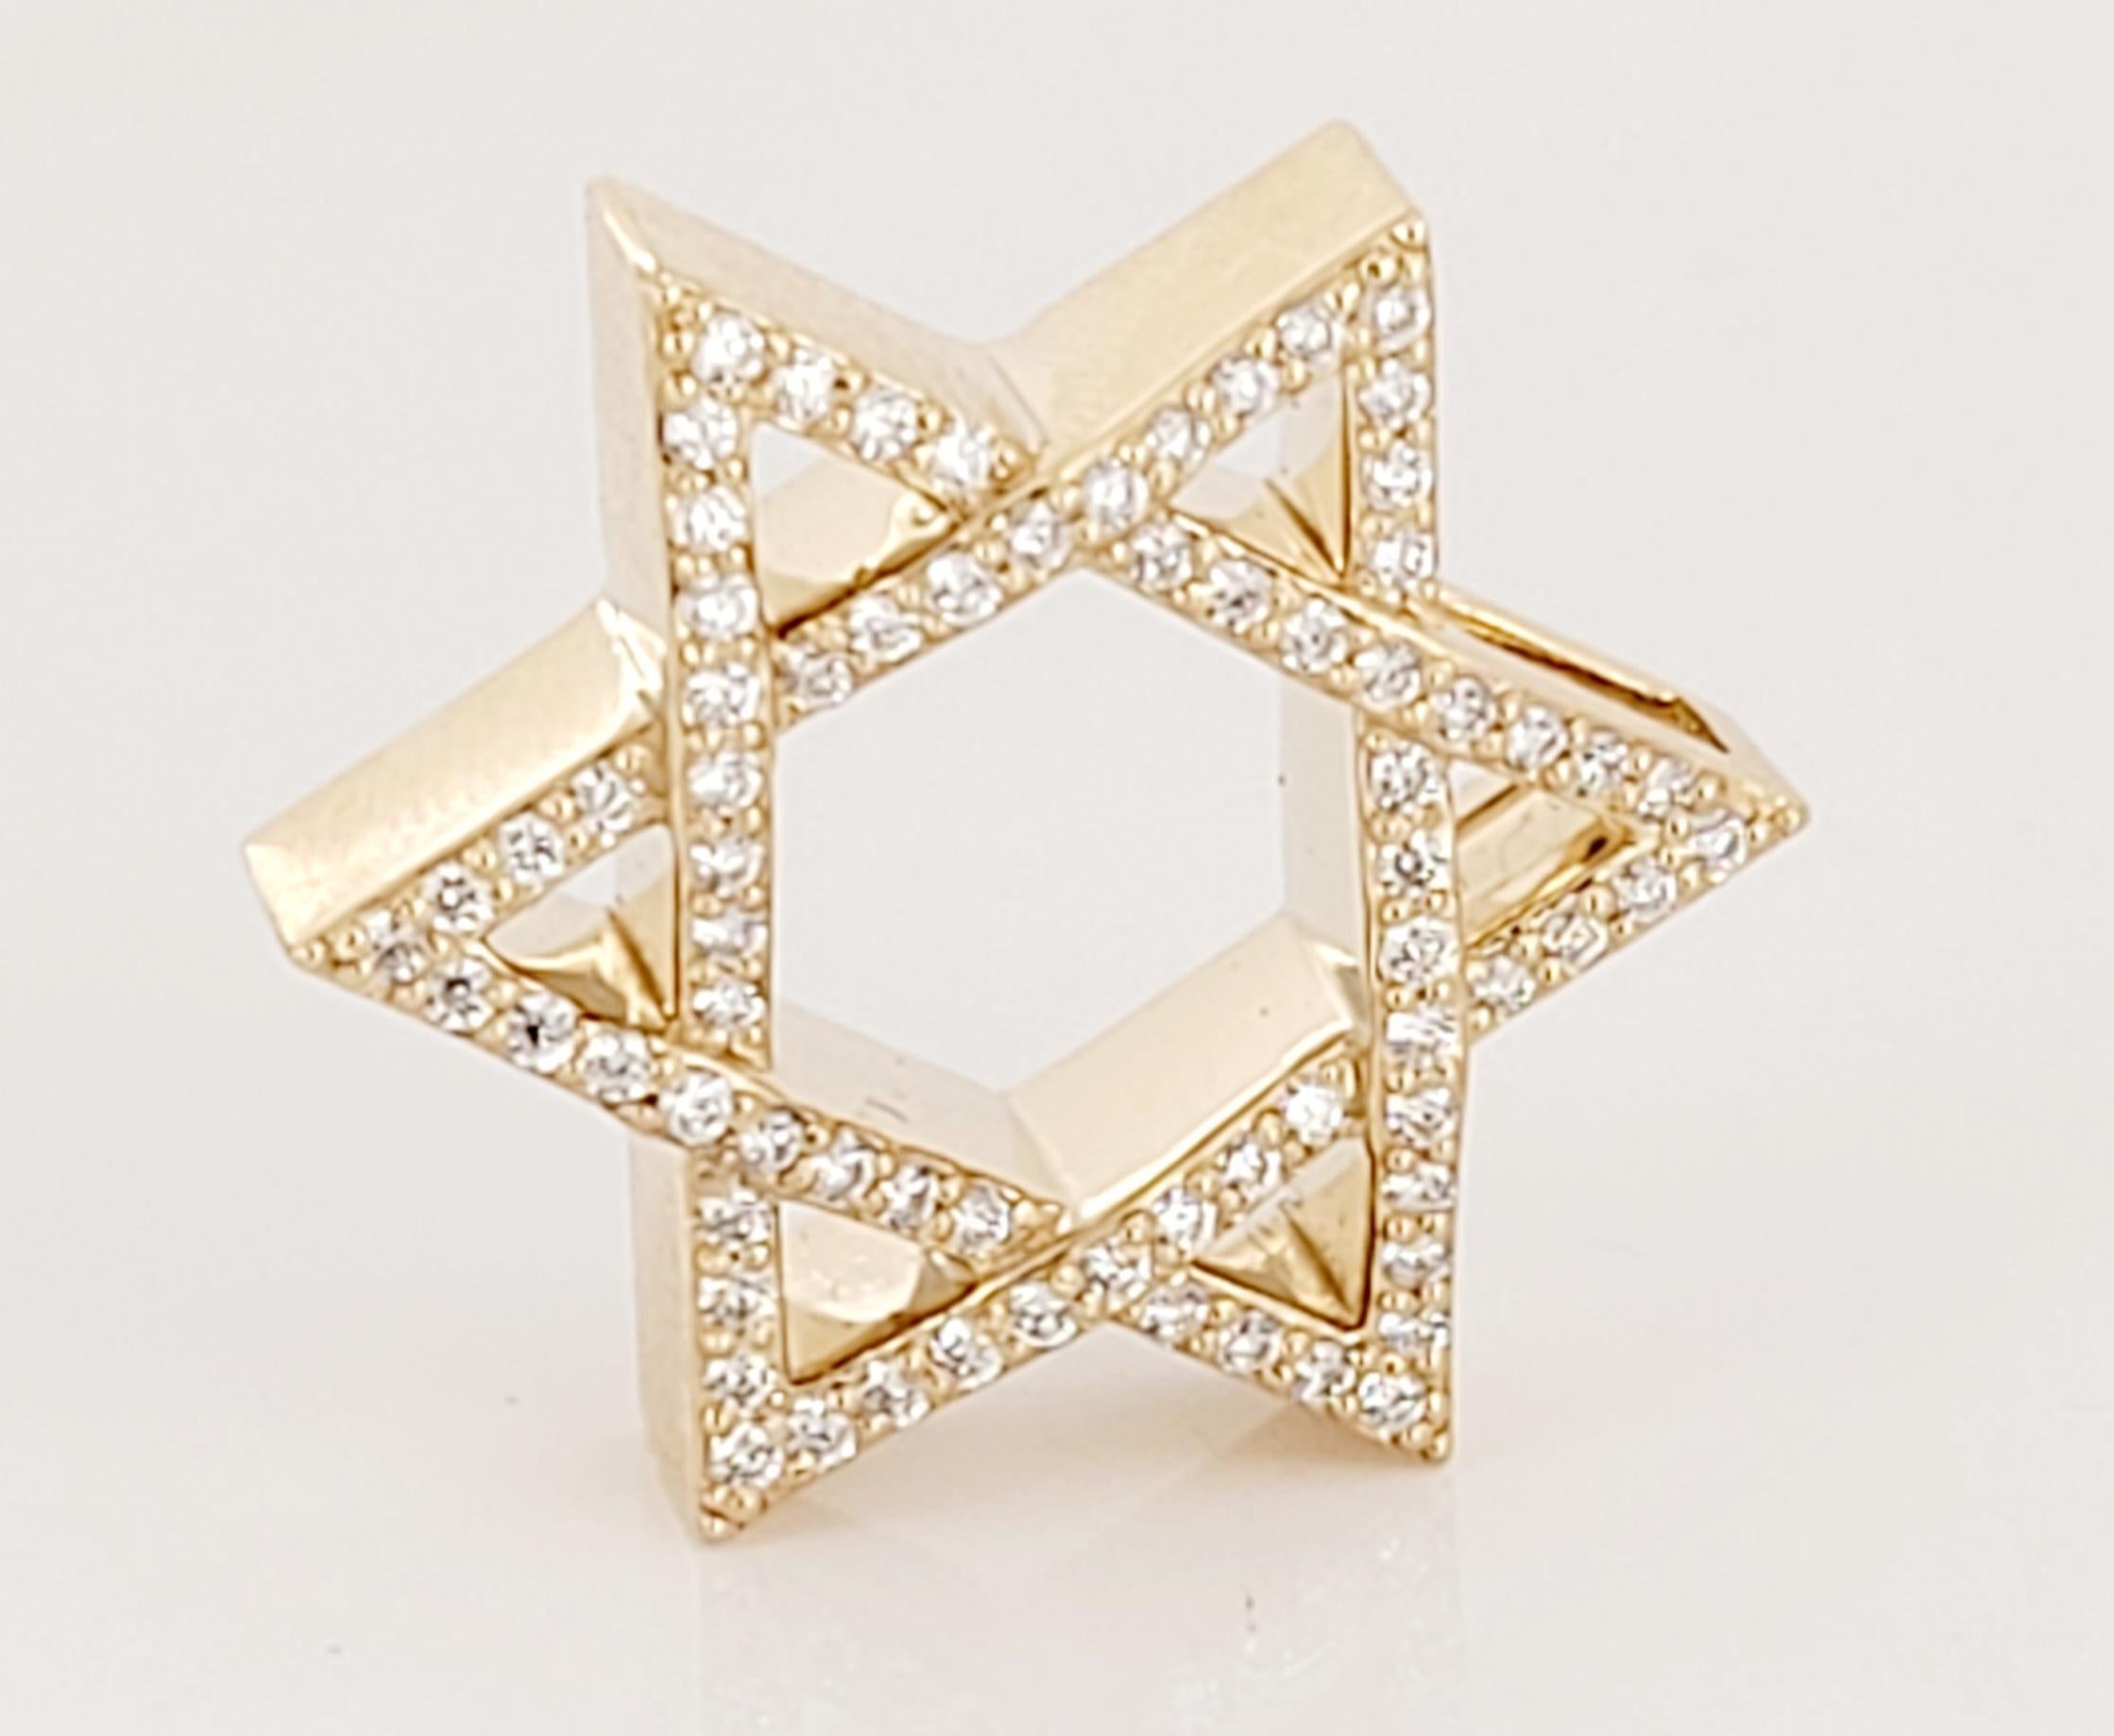 Star Shape Pendant 
14K Yellow Gold 
Diamonds .60ct
Clarity VS
Color Grade G
Weight 7.5gr
Pendant dimension 21mm X 21mm
Condition New, never worn
Retail Price: $2,500